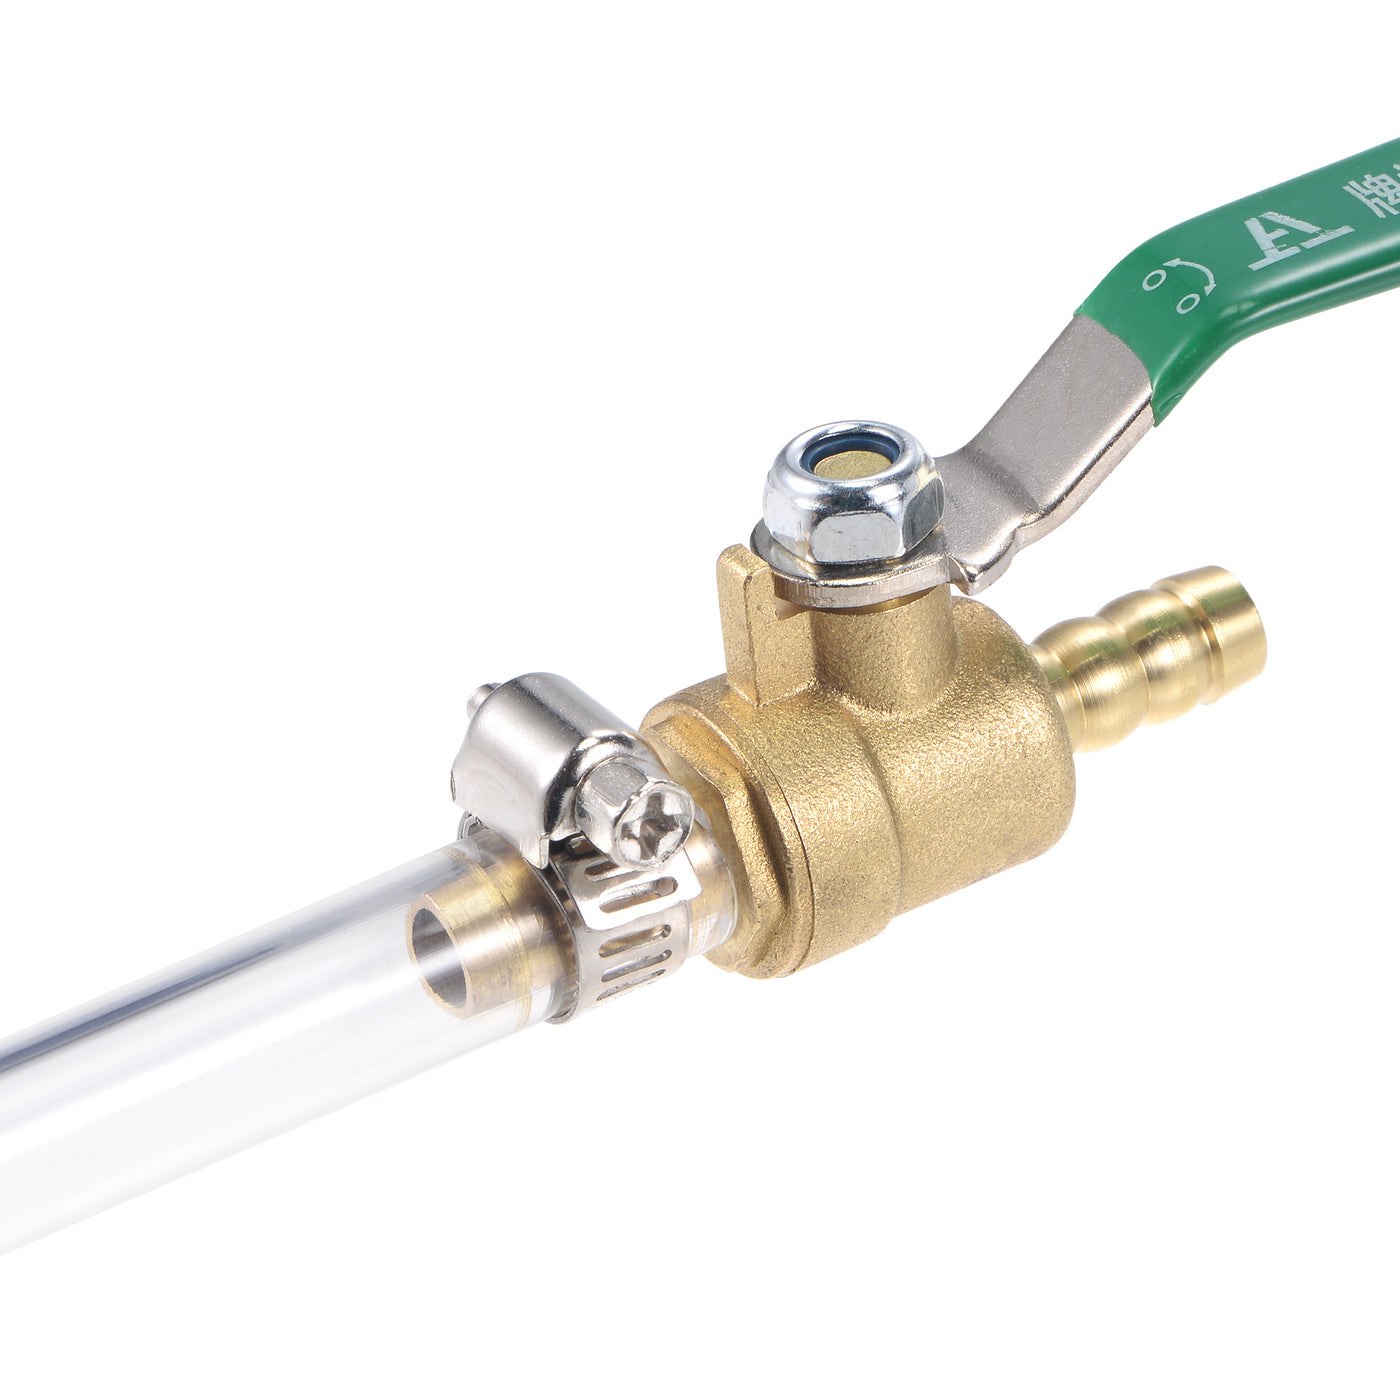 Uxcell Uxcell Brass Air Ball Valve Shut Off Switch 8mm Hose Barb to 8mm Hose Barb with Clamps Green Handle 2Pcs